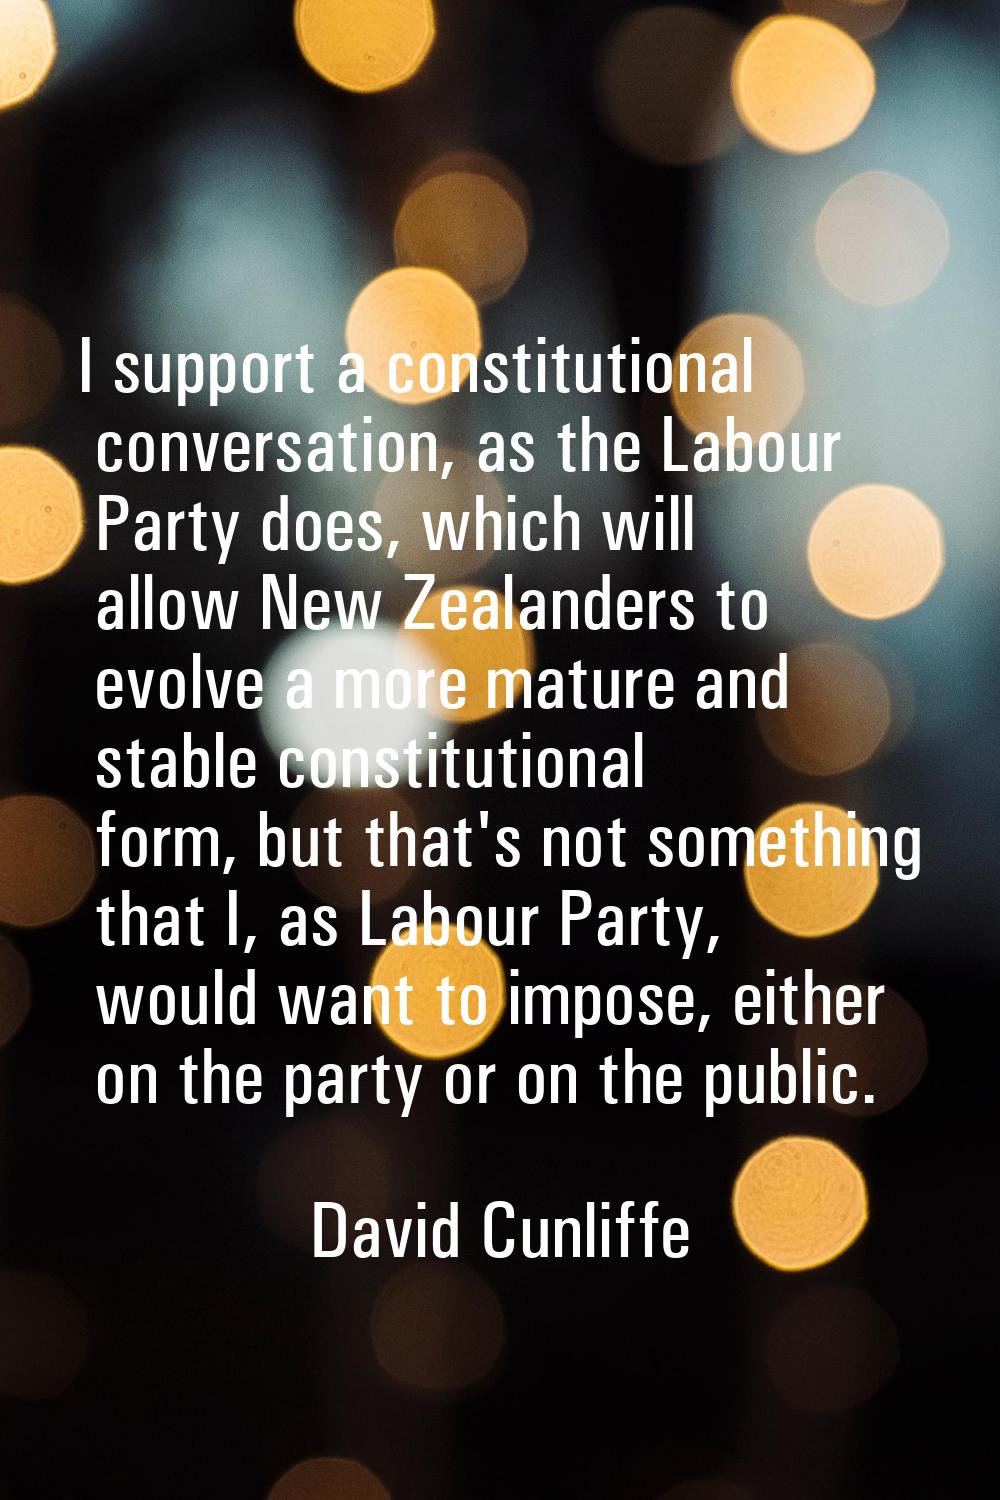 I support a constitutional conversation, as the Labour Party does, which will allow New Zealanders 